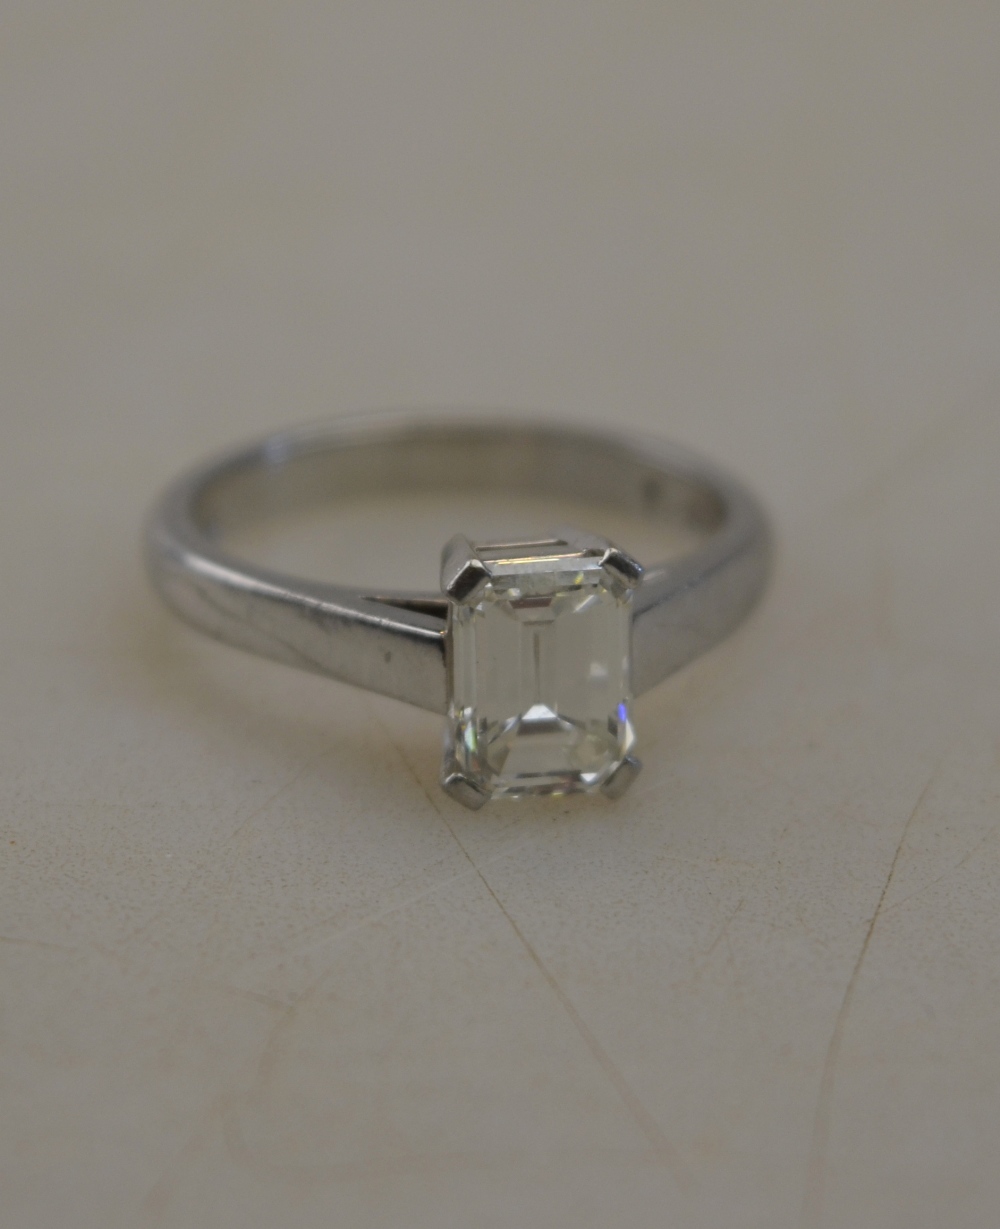 A single stone emerald cut diamond ring in 950 platinum four claw setting c/w GIA certificate - Image 2 of 5